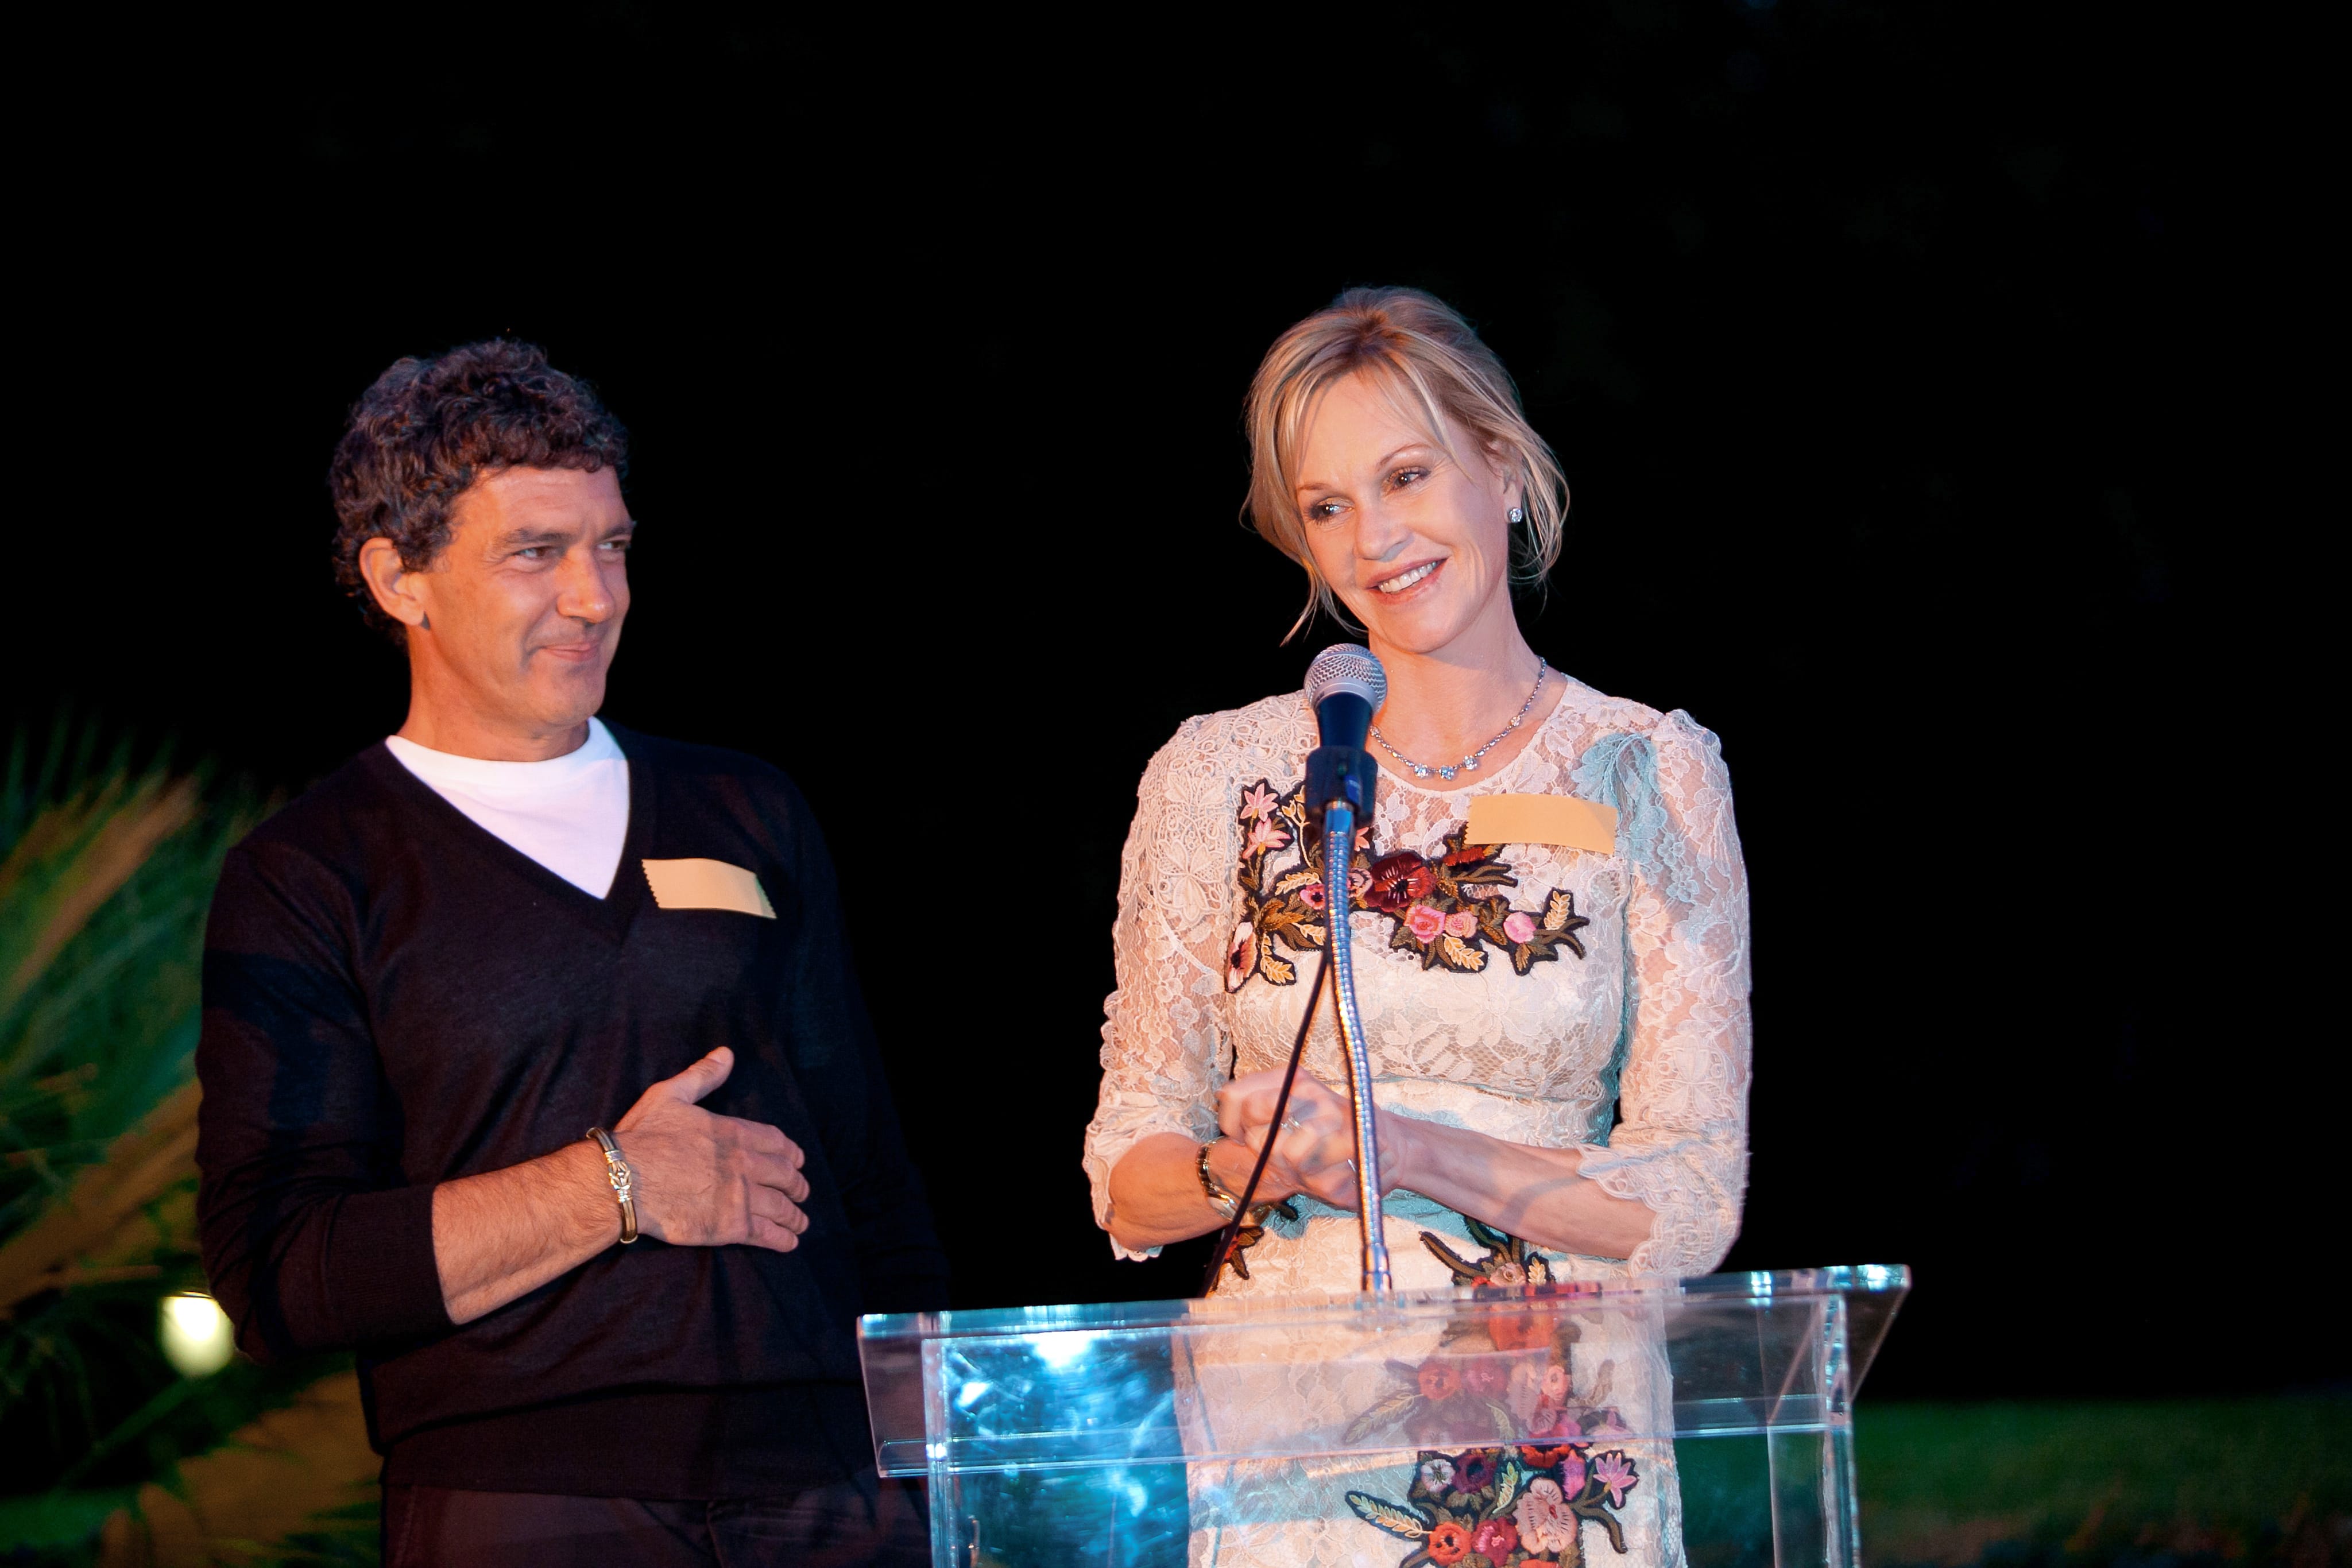 Melanie Griffith and Antonio Banderas Purchase Critical Medical Equipment for Children ...4096 x 2731